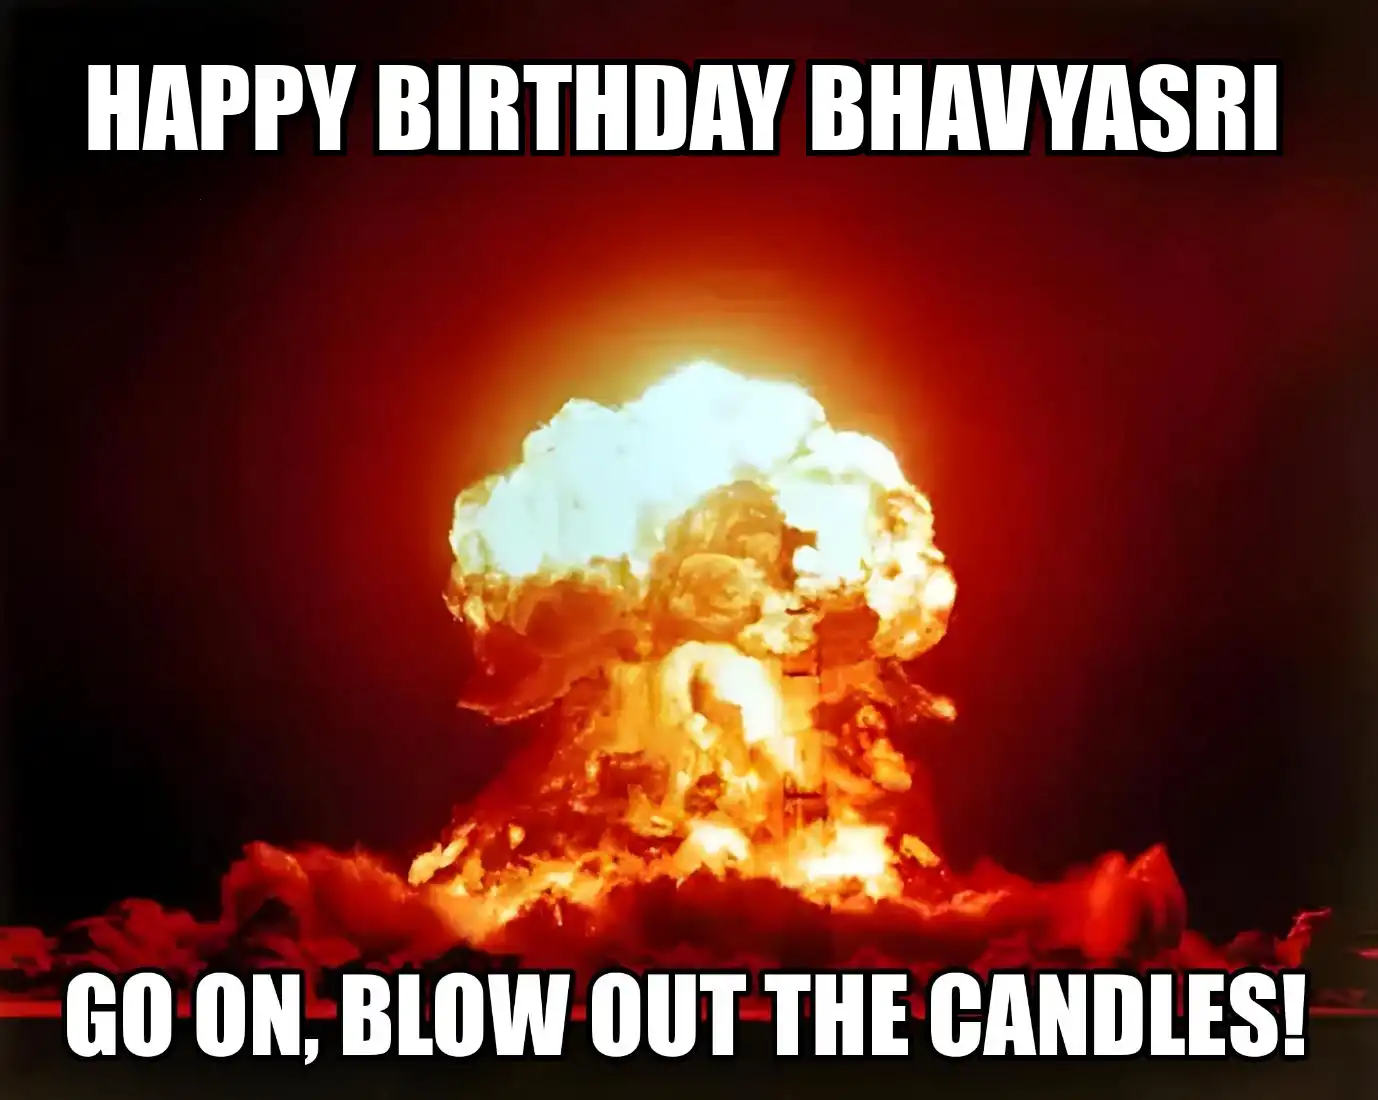 Happy Birthday Bhavyasri Go On Blow Out The Candles Meme